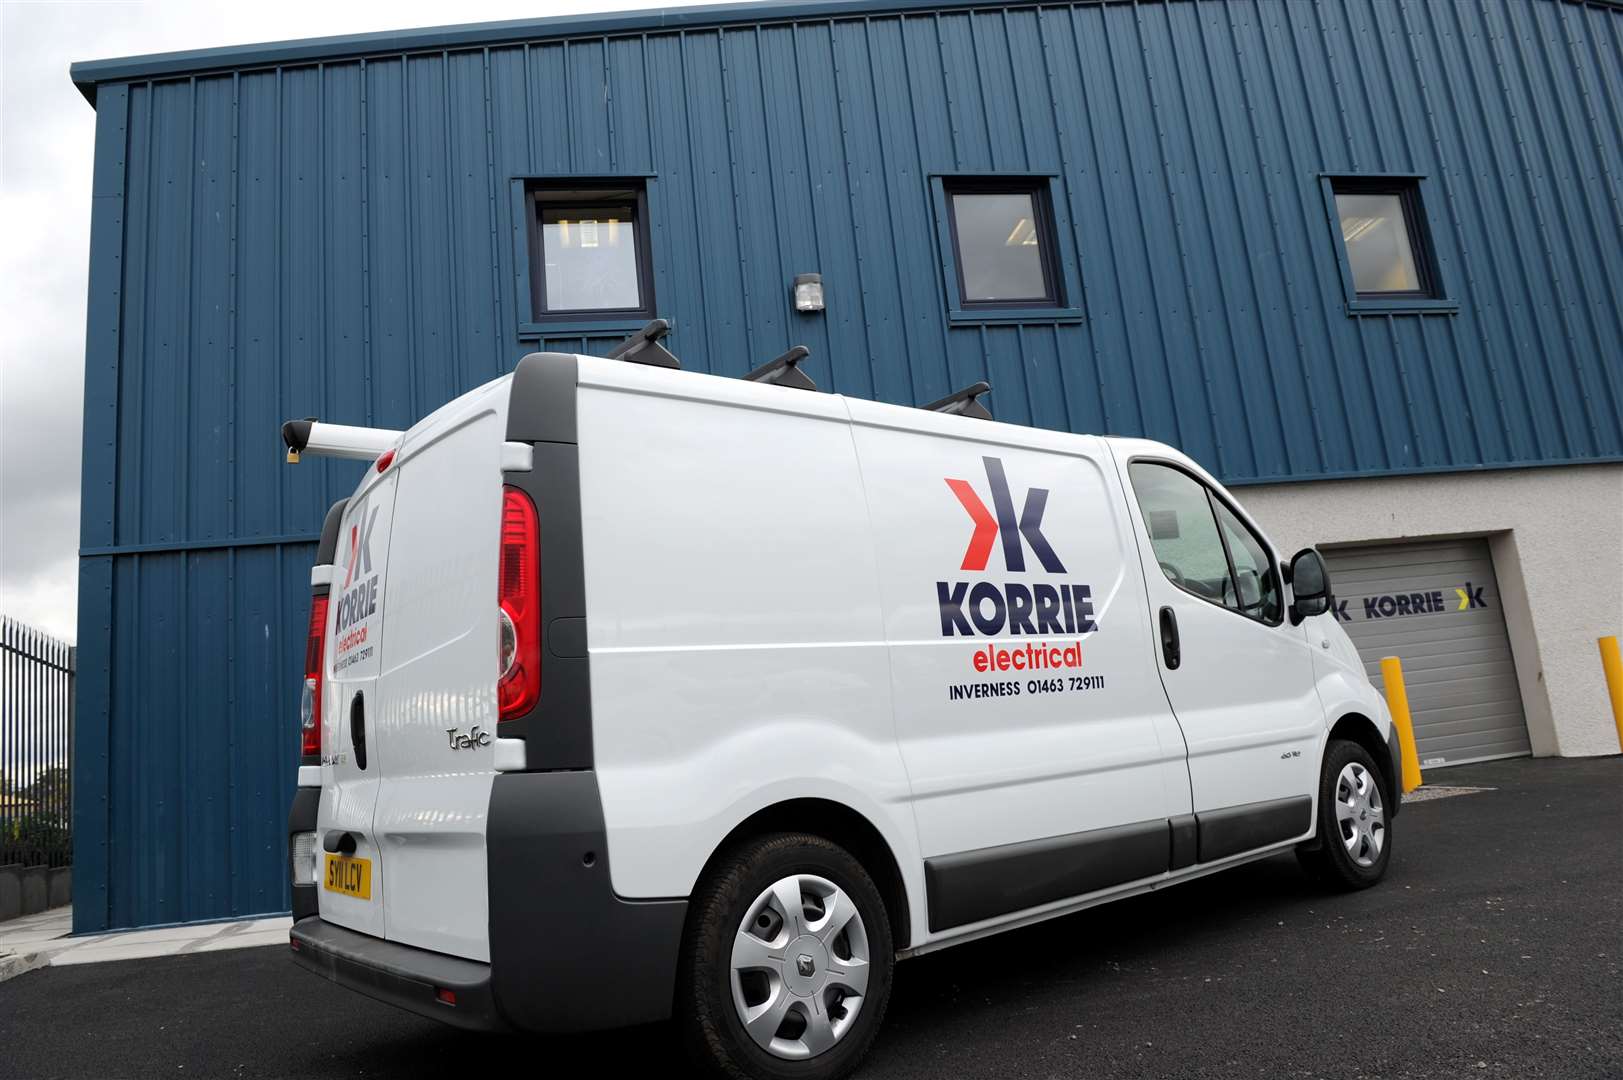 Korrie Mechanical and Plumbing recorded increased pre-tax profit and turnover.